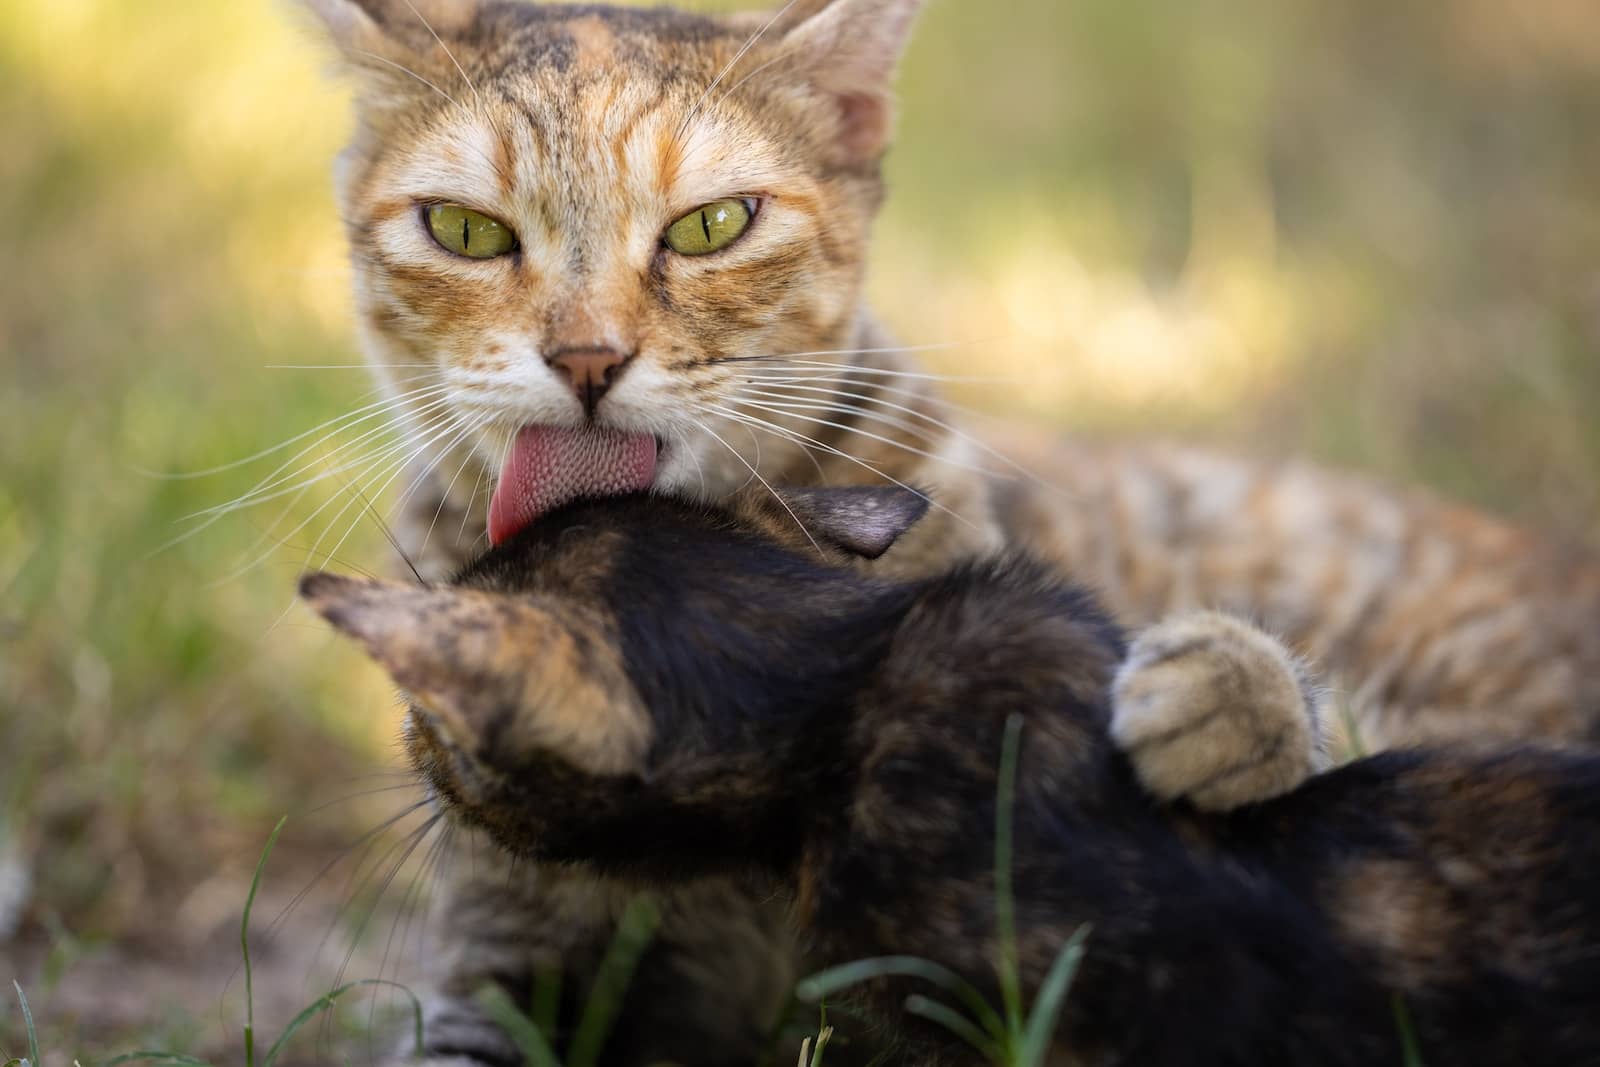 a cat licking another cat's tail in the grass